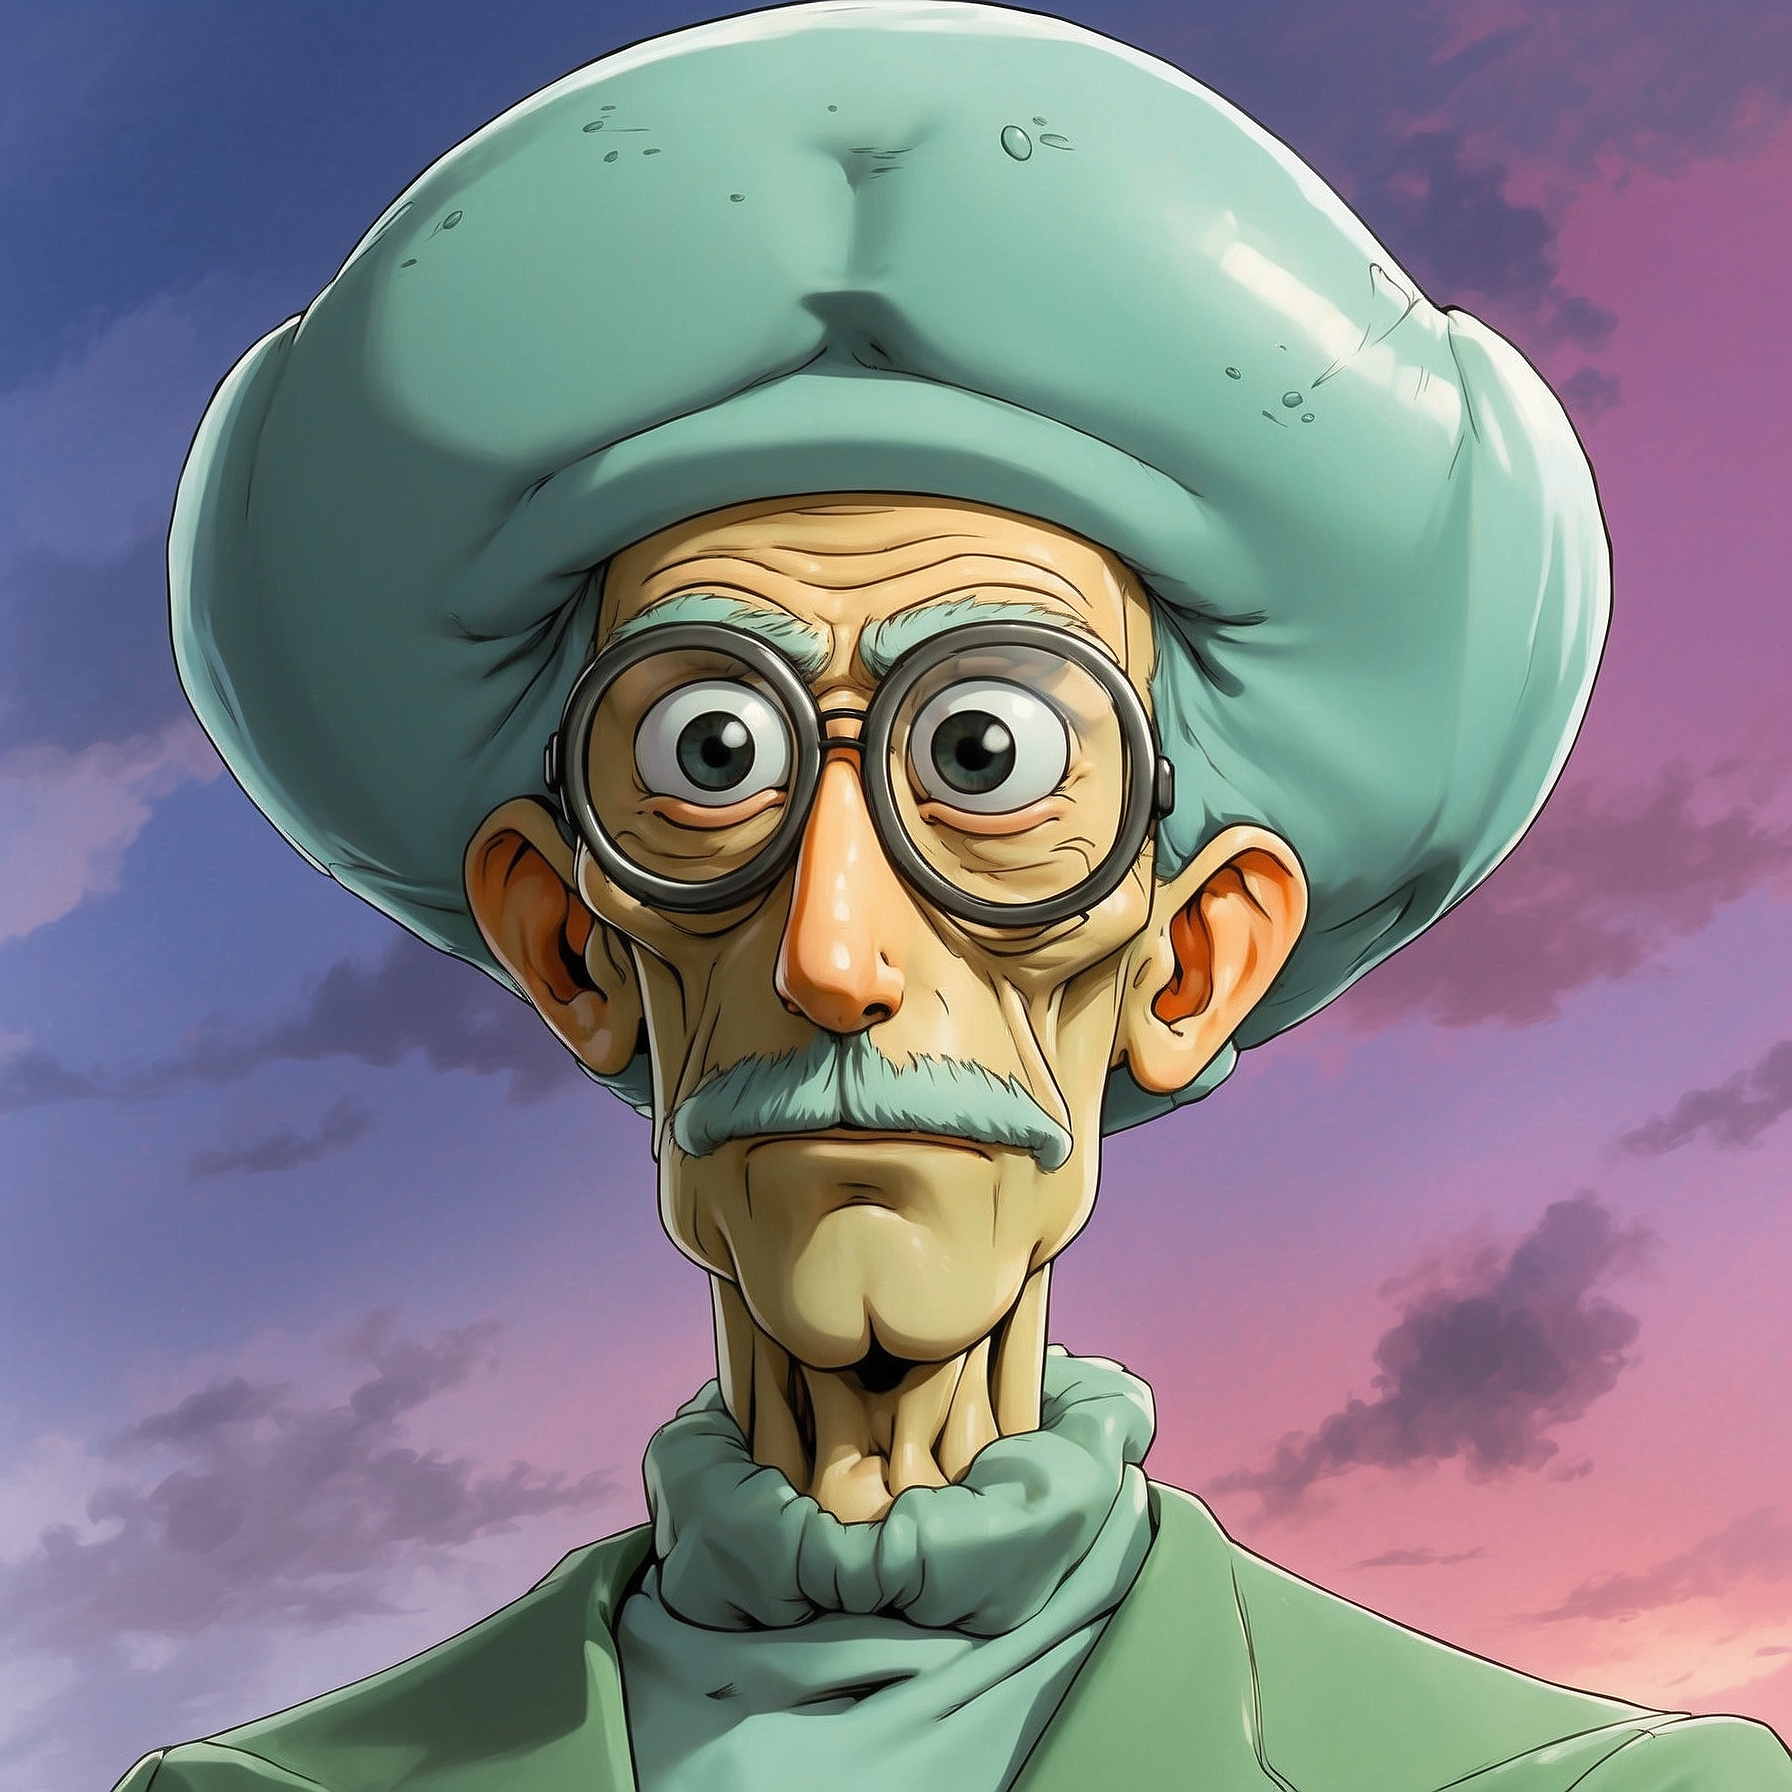 Profile picture of a stylized Squidward Tentacles character with a detailed 3D rendering against a sunset sky backdrop.